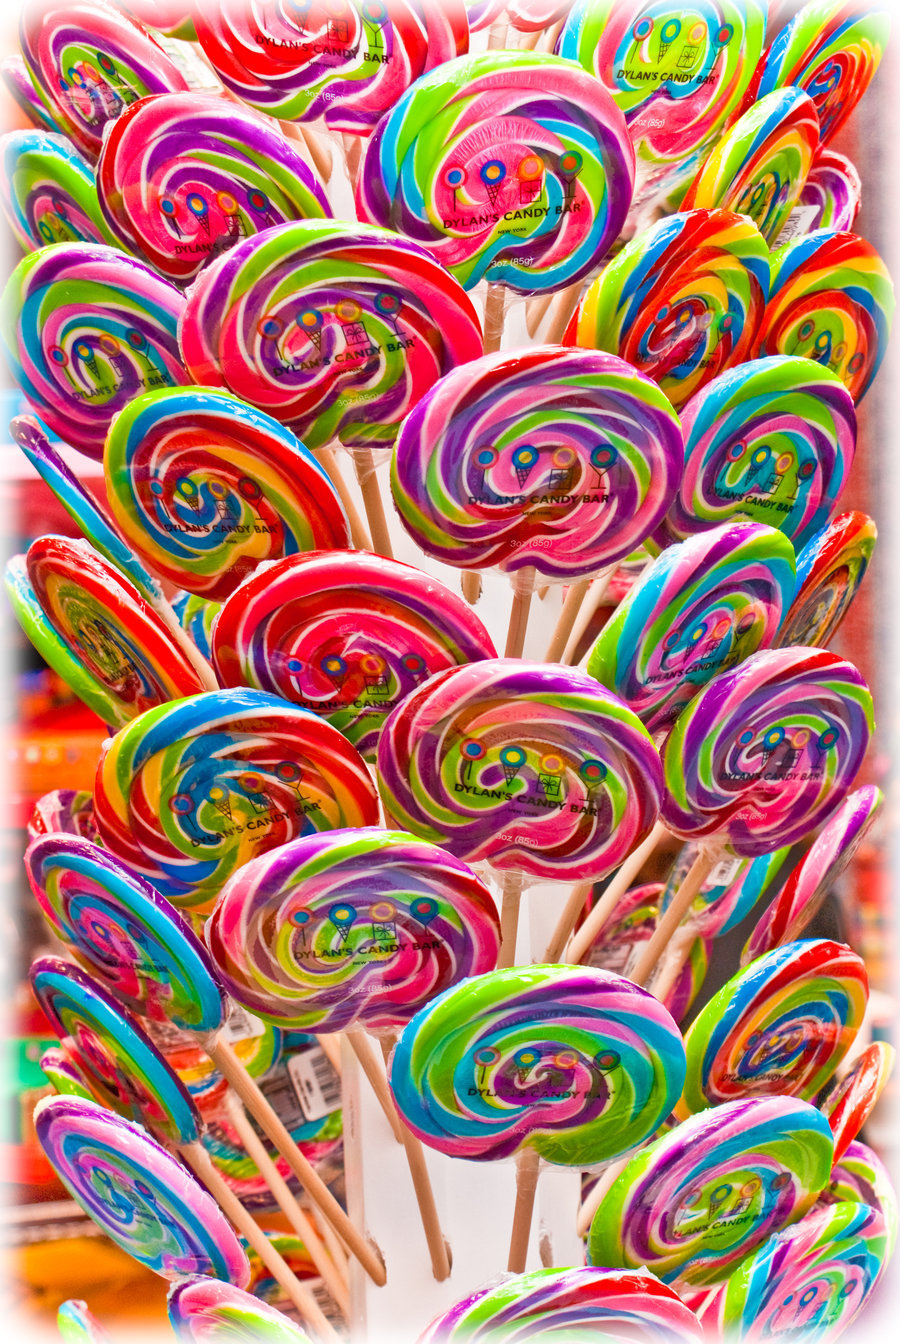 Candy Land By Ocdfx